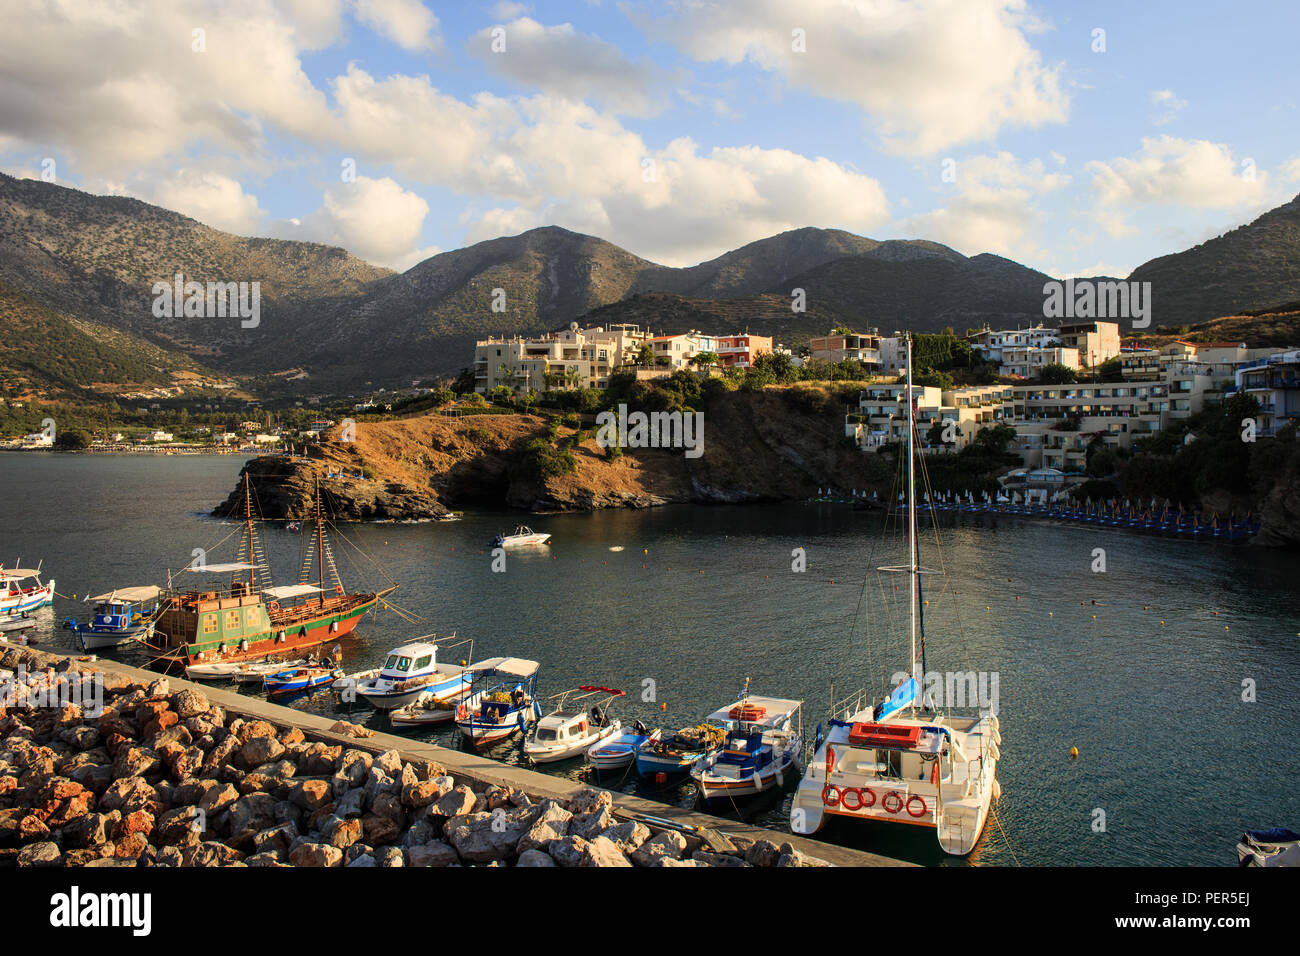 Harbour with marine vessels, boats. Panoramic view from a cliff on a Bay Bali Crete, Greece Stock Photo